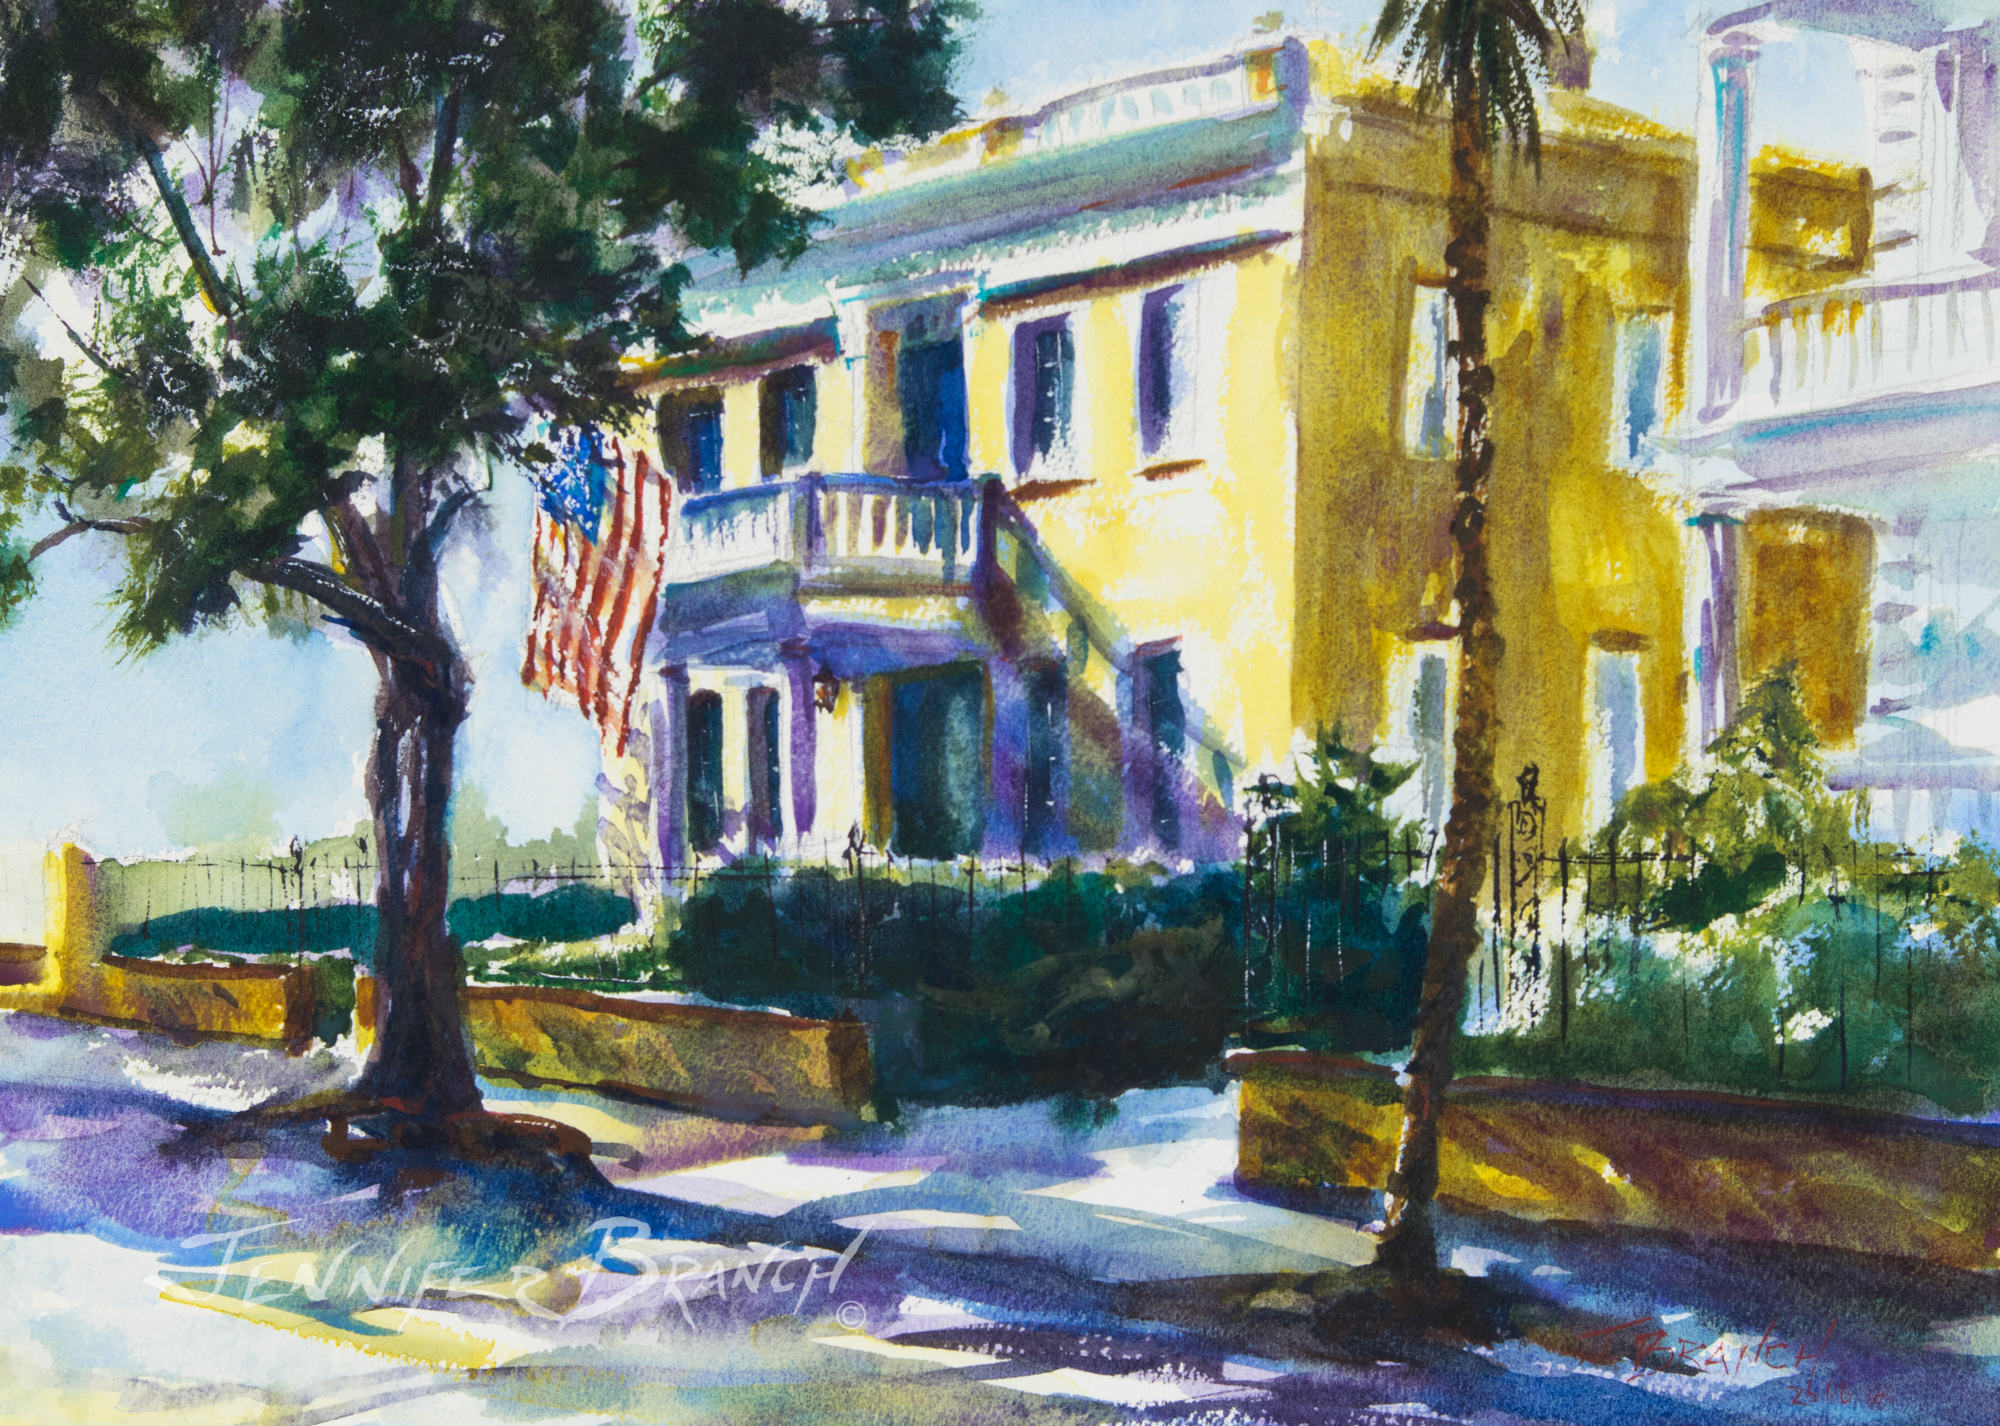 Charleston watercolor painting of a beautiful house flying an American flag.
 by Jennifer Branch